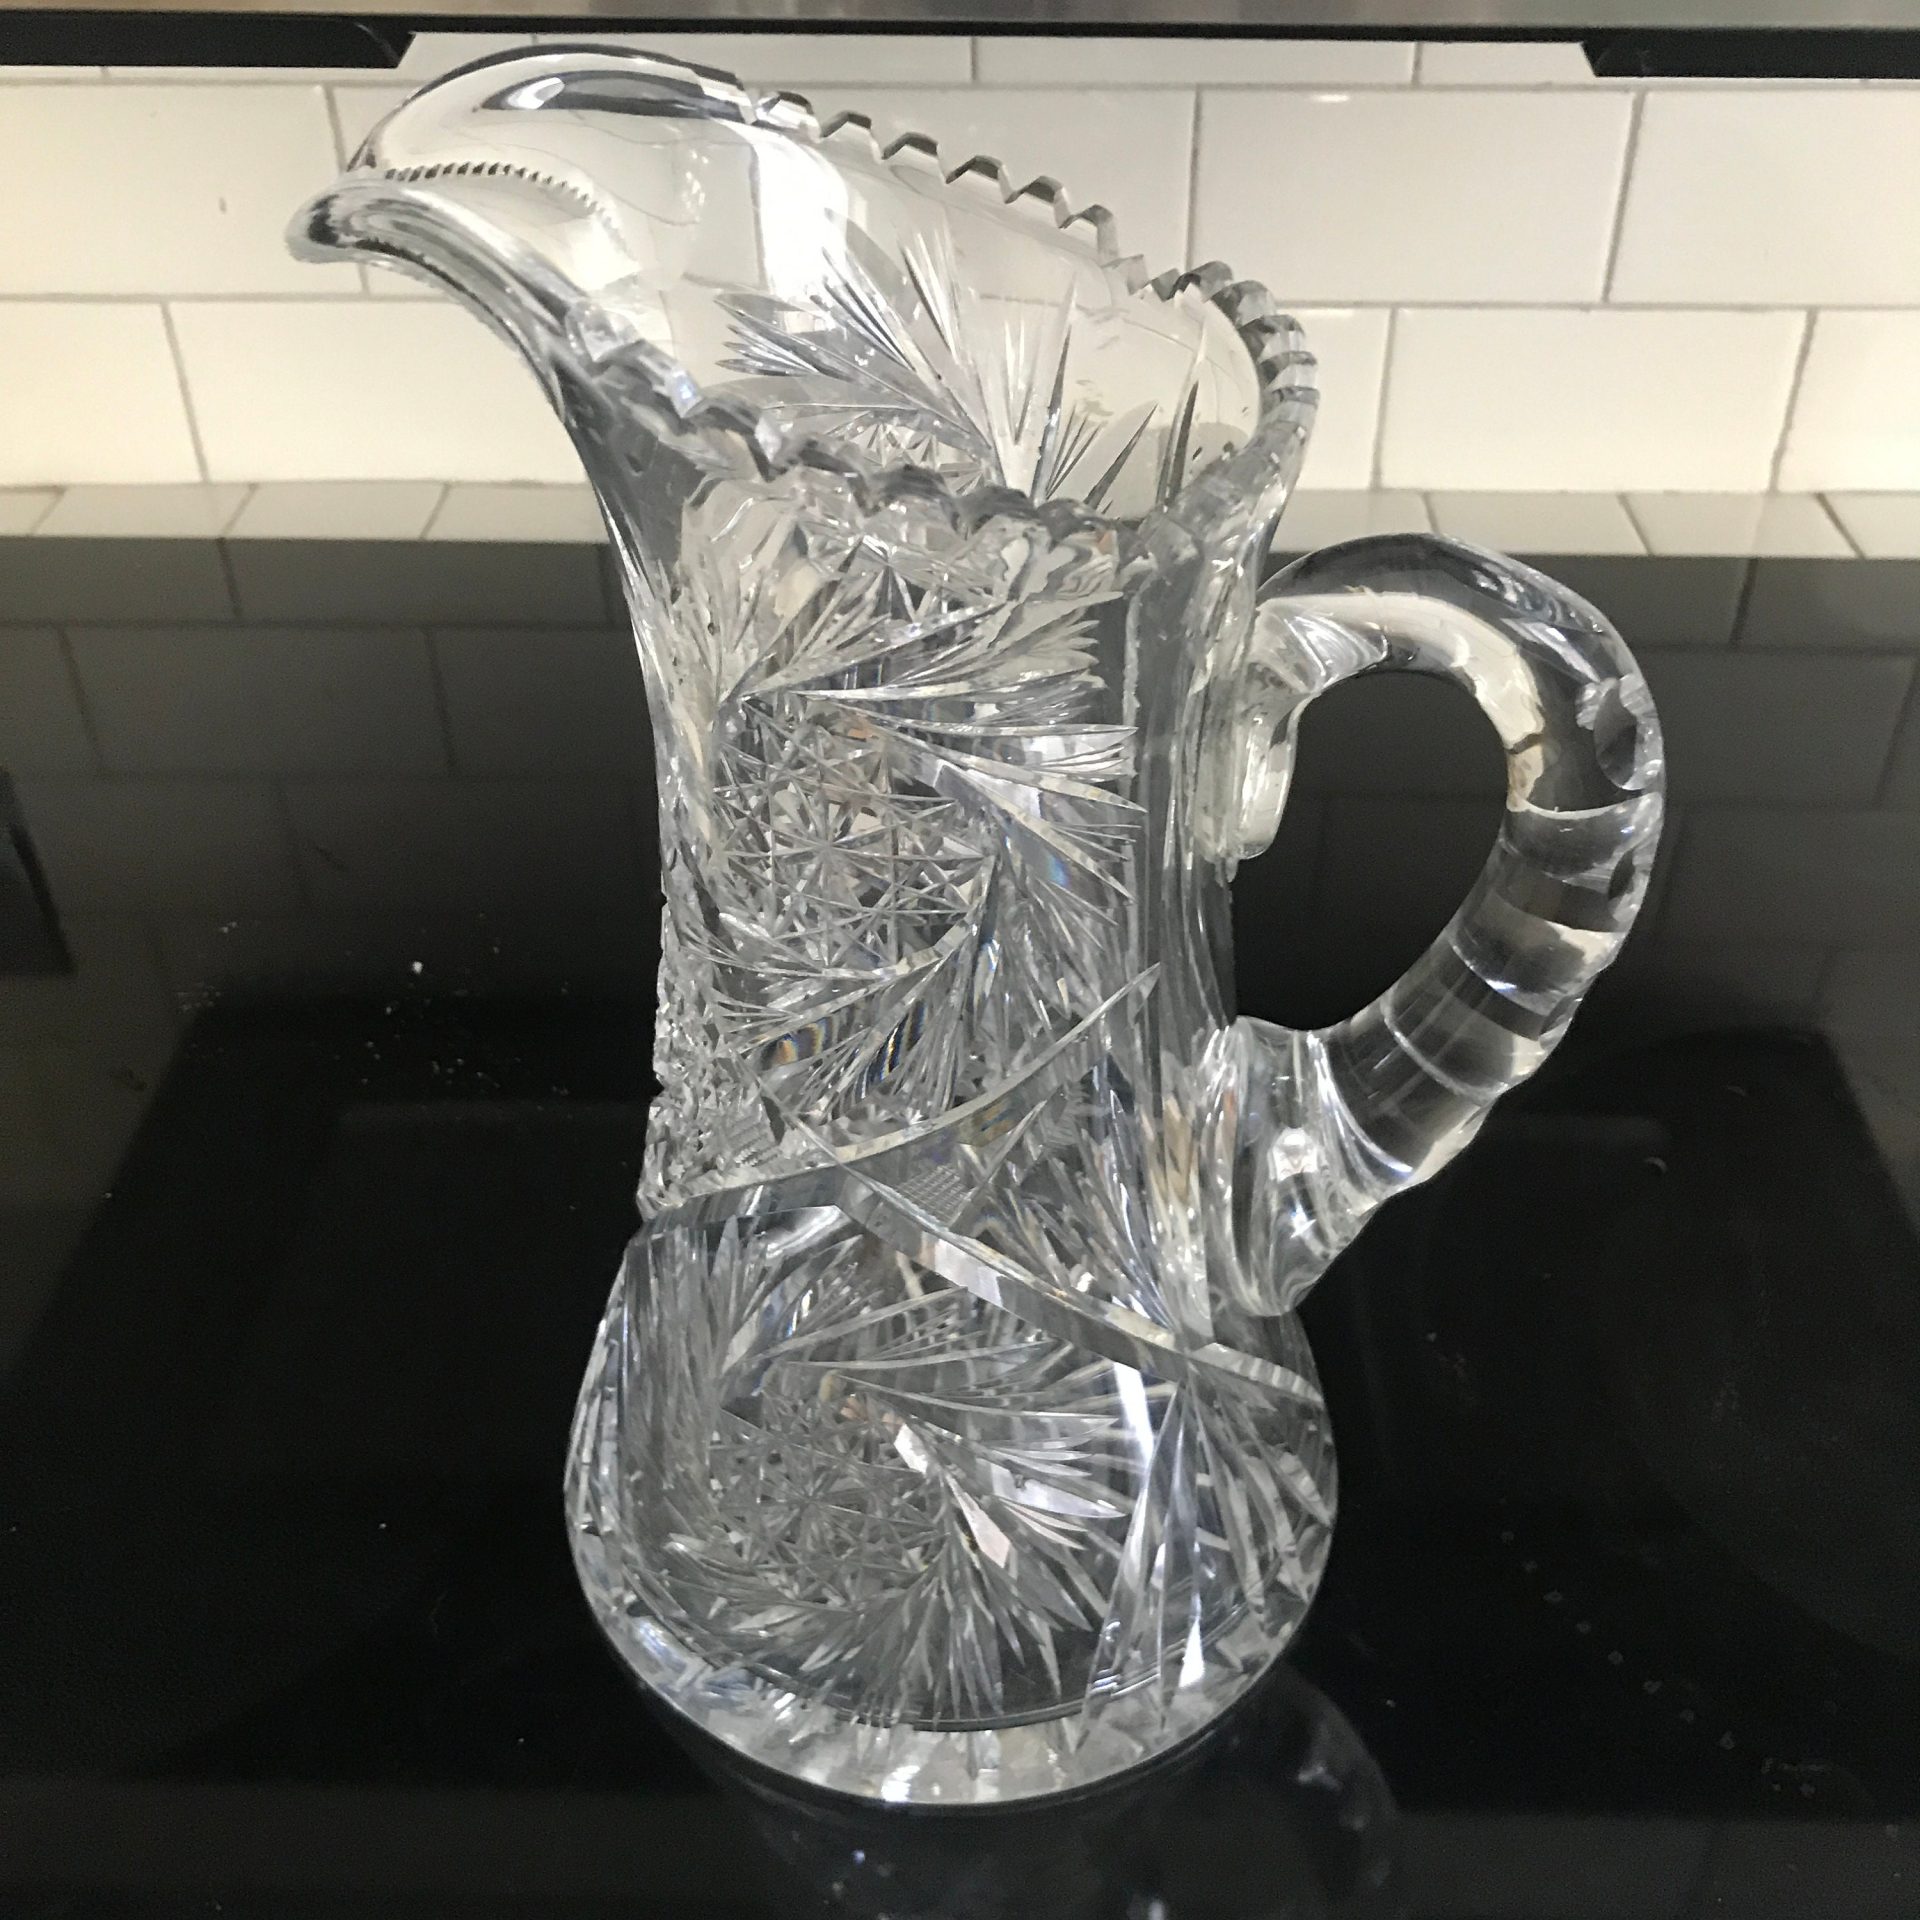 https://www.truevintageantiques.com/wp-content/uploads/2021/11/antique-american-brilliant-cut-glass-pitcher-beautiful-large-cut-rim-and-handle-mint-condition-11-tall-collectible-display-elegant-61a296ac1-scaled.jpg